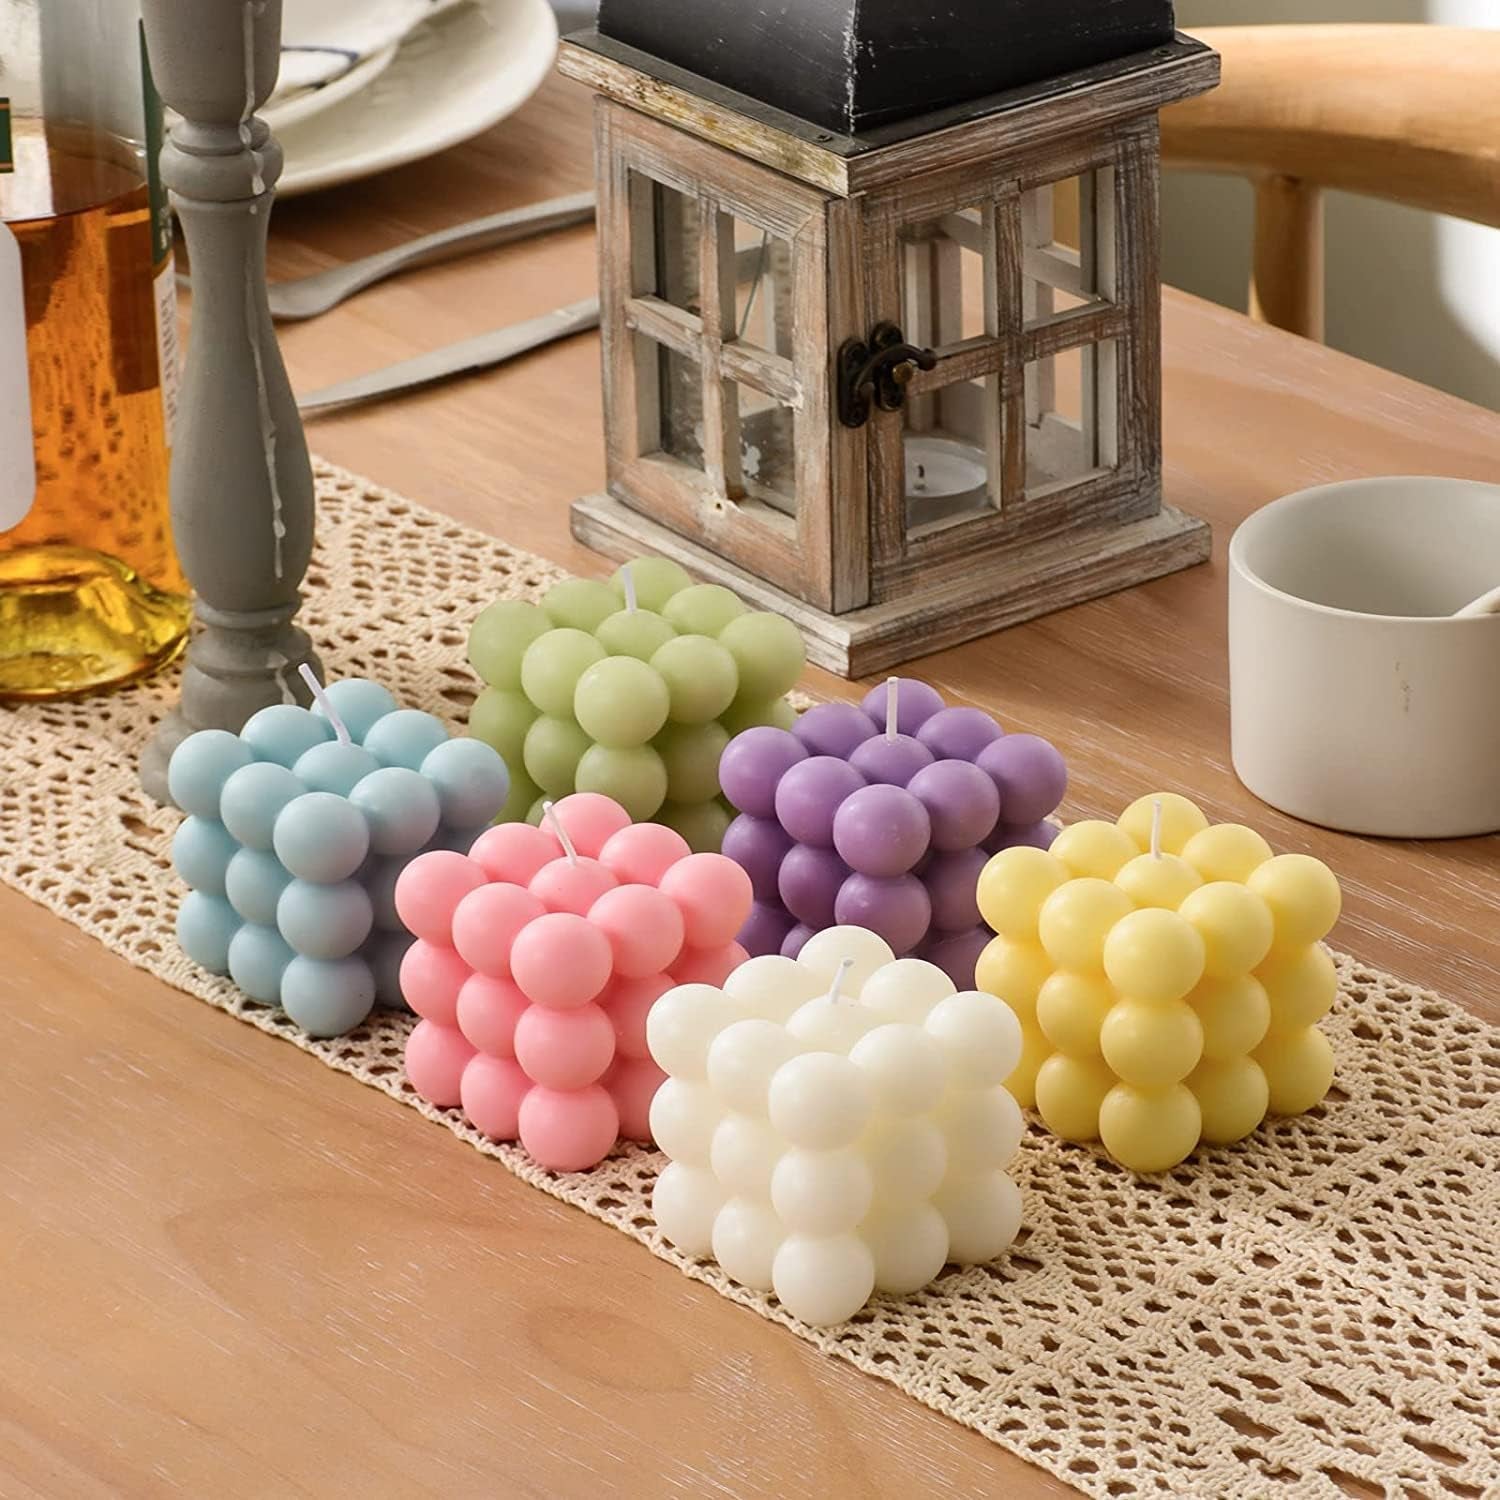 Cube Candle Molds, 6 Cavity 3D Bubble Silicone Molds for Candles Making, Cake Mold for Baking Chocolate Dessert Mousse Cake Ice Cream and Making Soap Wax